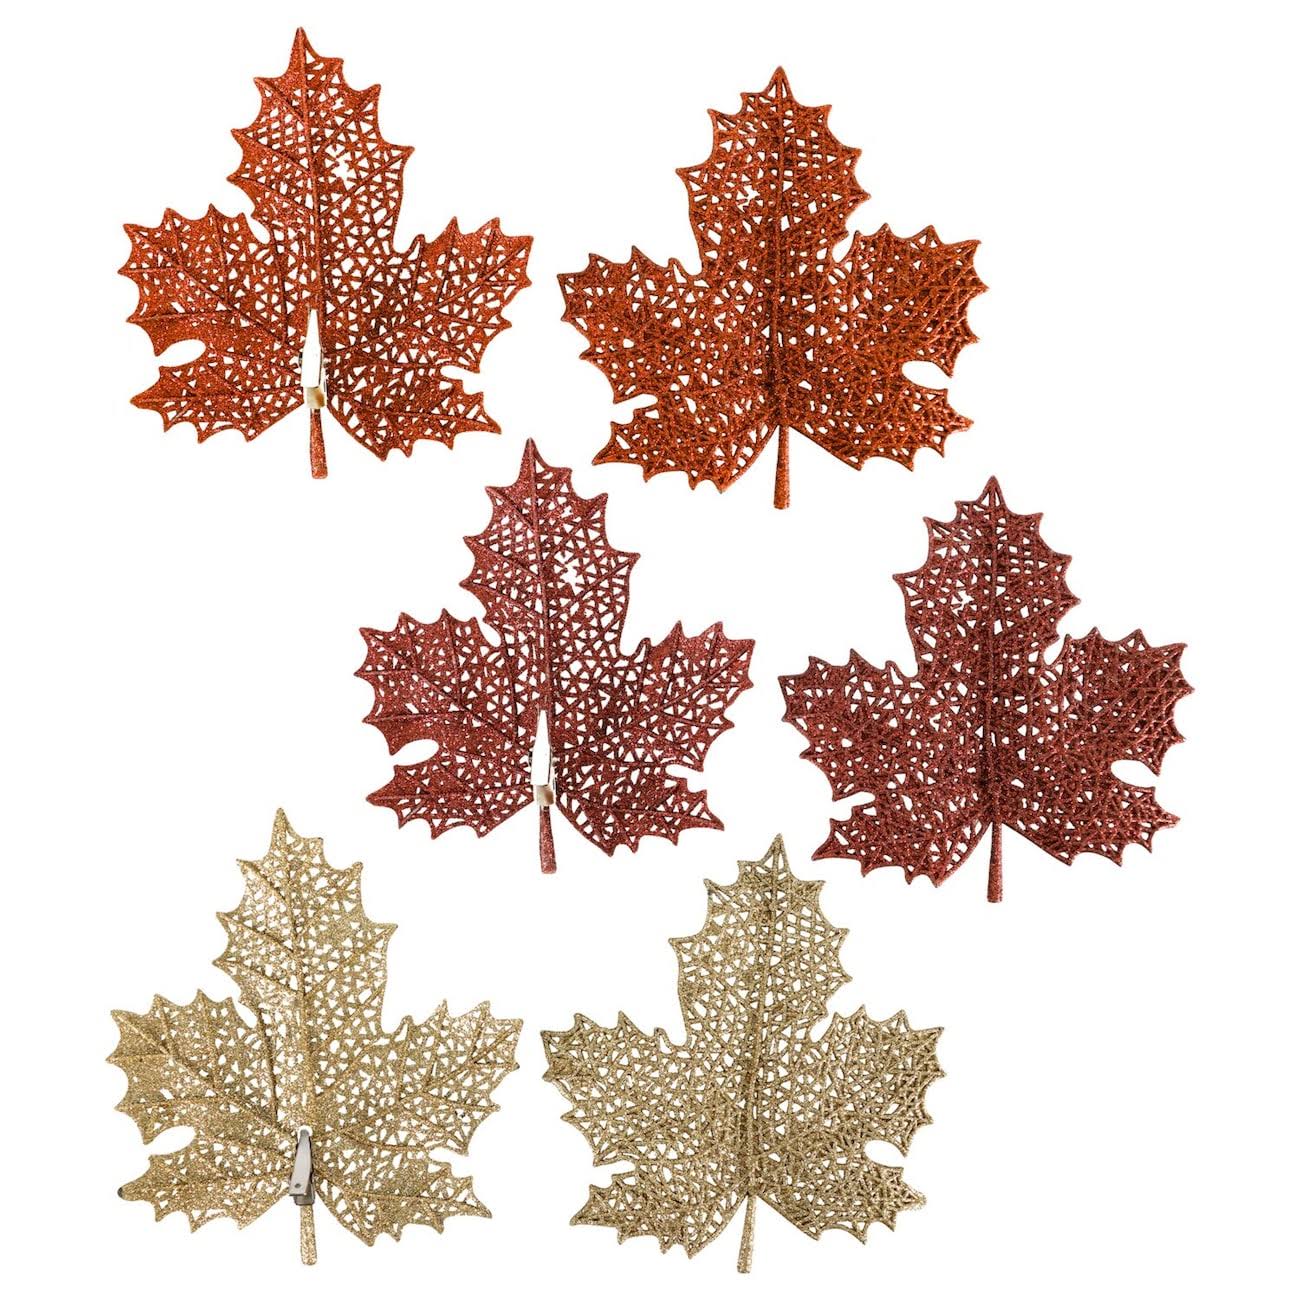 36 Glittery Plastic Maple Leaf Decorations with Metal Clips, 2-Ct. Packs at Dollar Tree